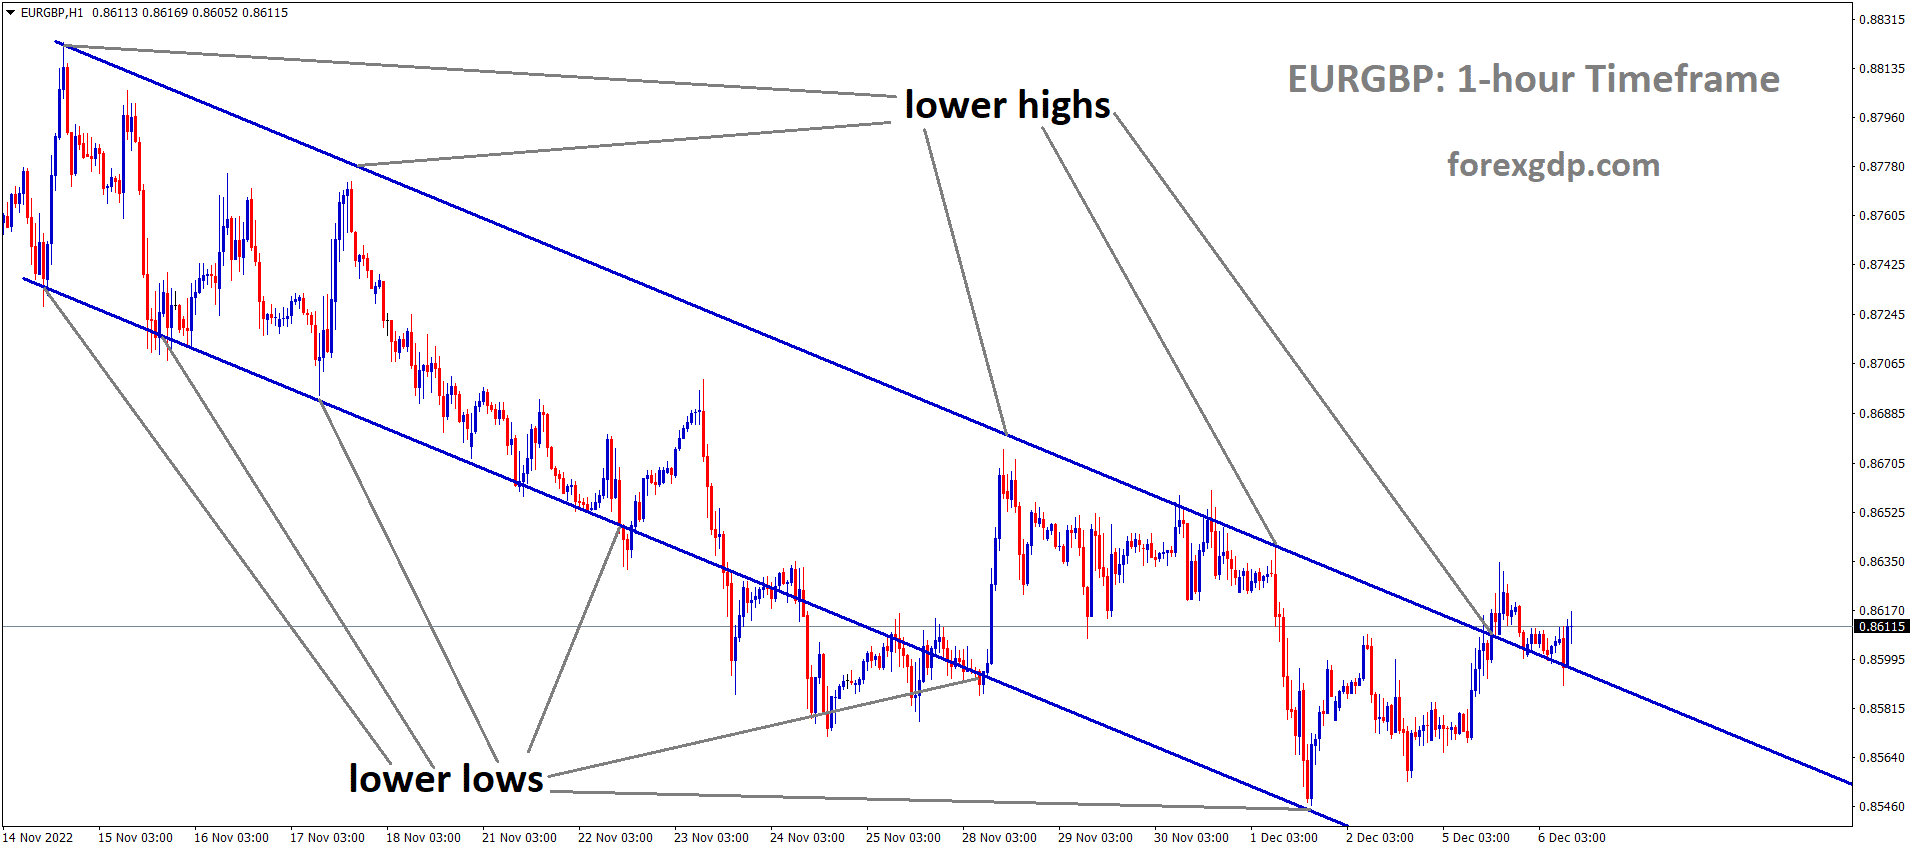 EURGBP is moving in the Descending channel and the market has reached the lower high area of the channel